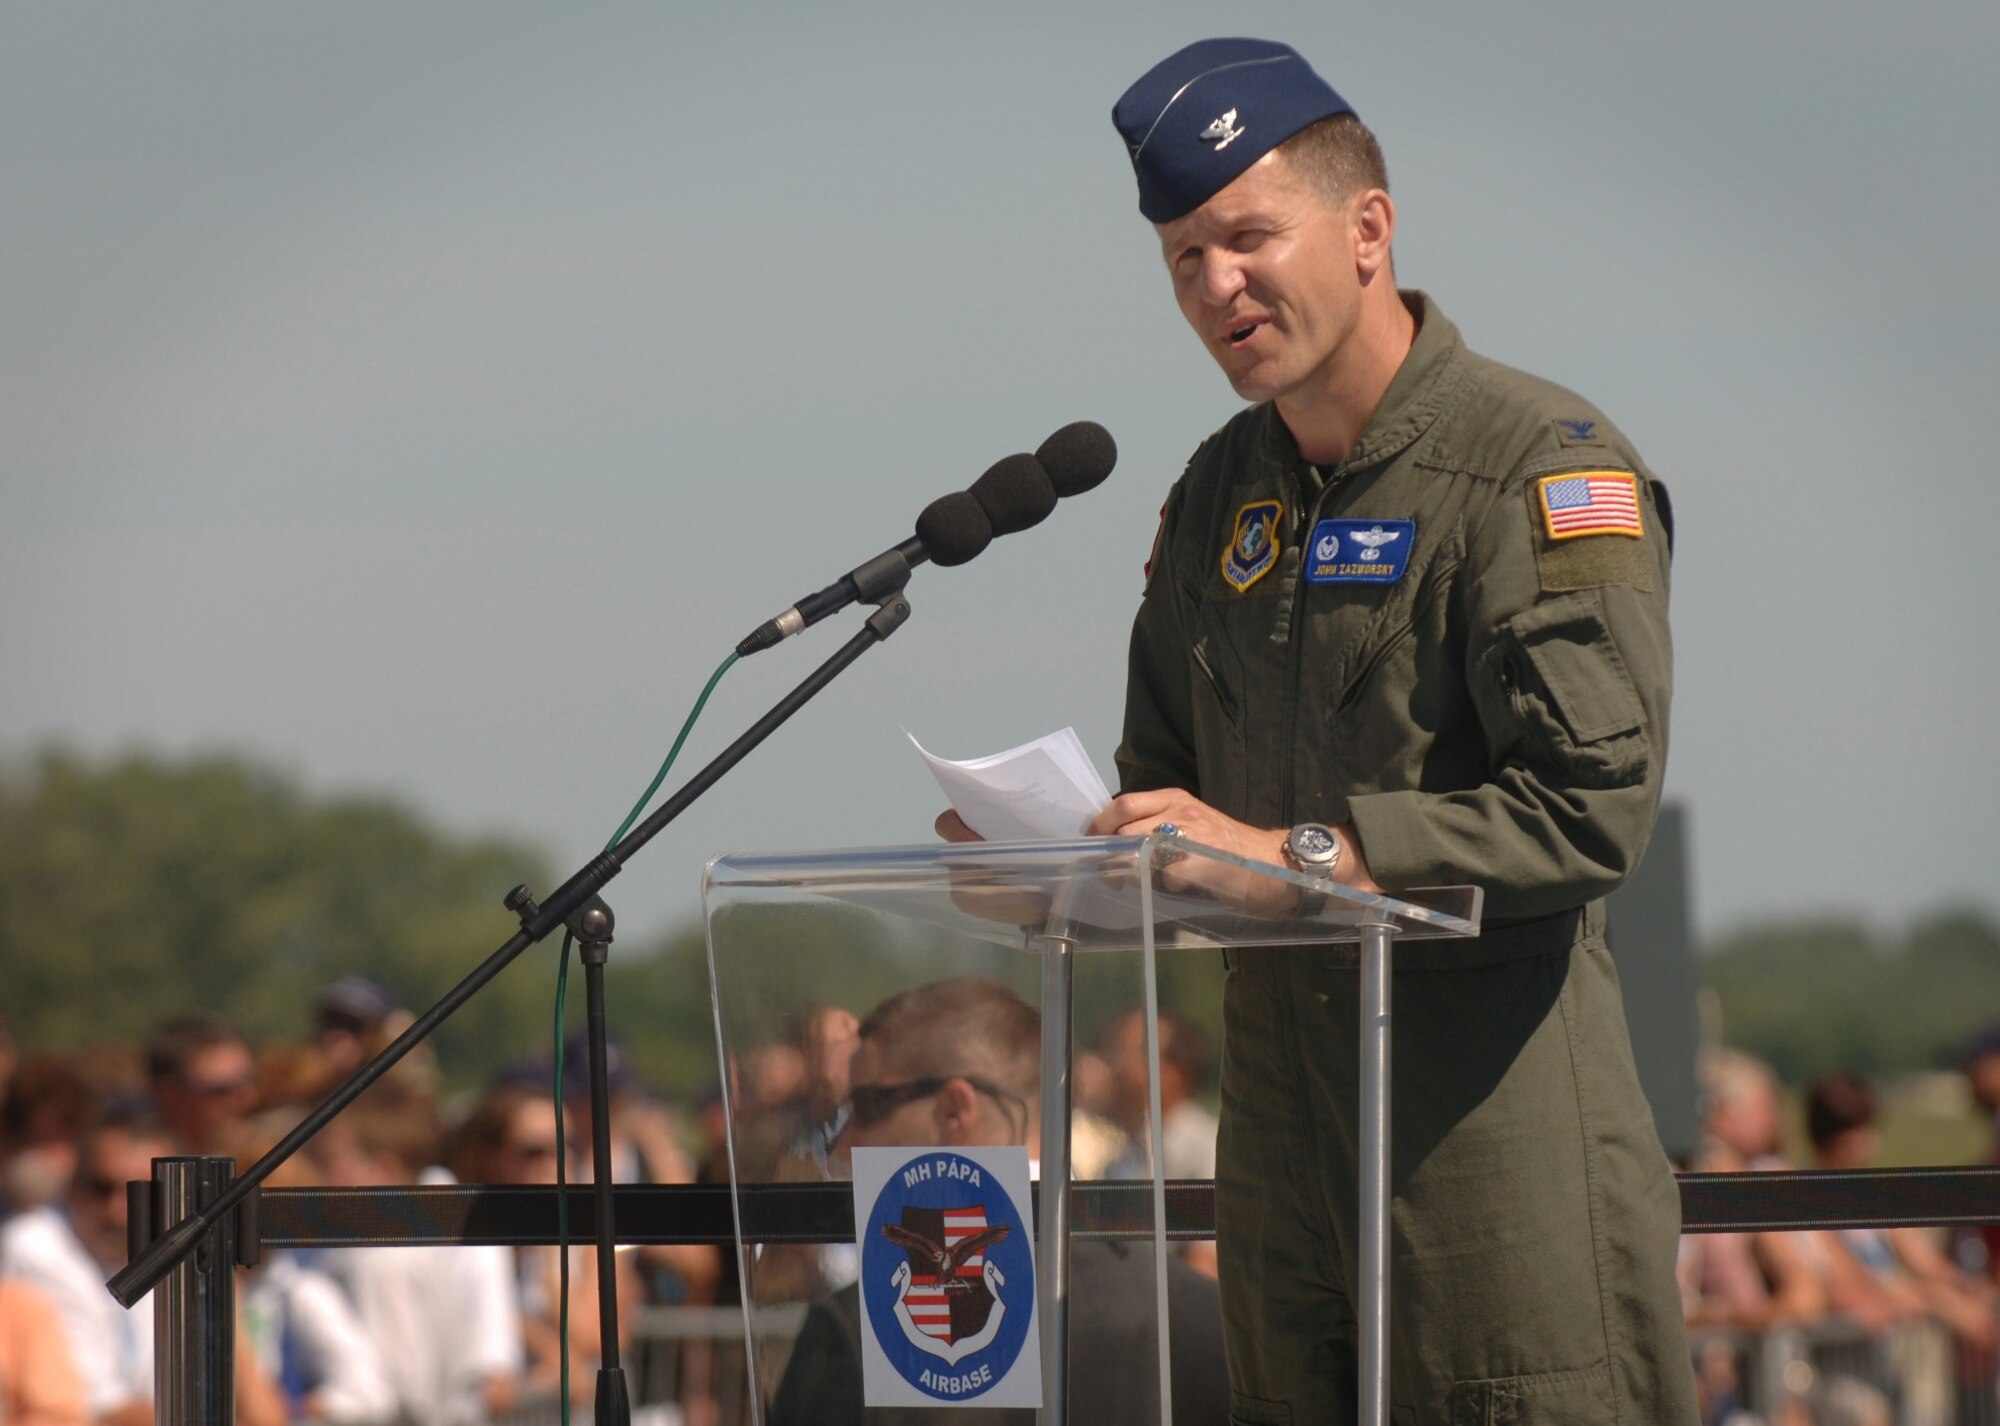 PAPA AIR BASE, Hungary--During the official activation ceremony of a first-of-its-kind multinational Heavy Airlift Wing at Papa Air Base, Hungary, on July 27, U.S. Air Force Col. John Zazworsky gives thanks to the 12 nations who, over the last 10 months, stood up the organization that will provide strategic airlift worldwide for humanitarian, disaster relief, and peacekeeping missions in support of the European Union, United Nations and NATO. (Department of Defense photo/ Master Sgt. Scott Wagers)